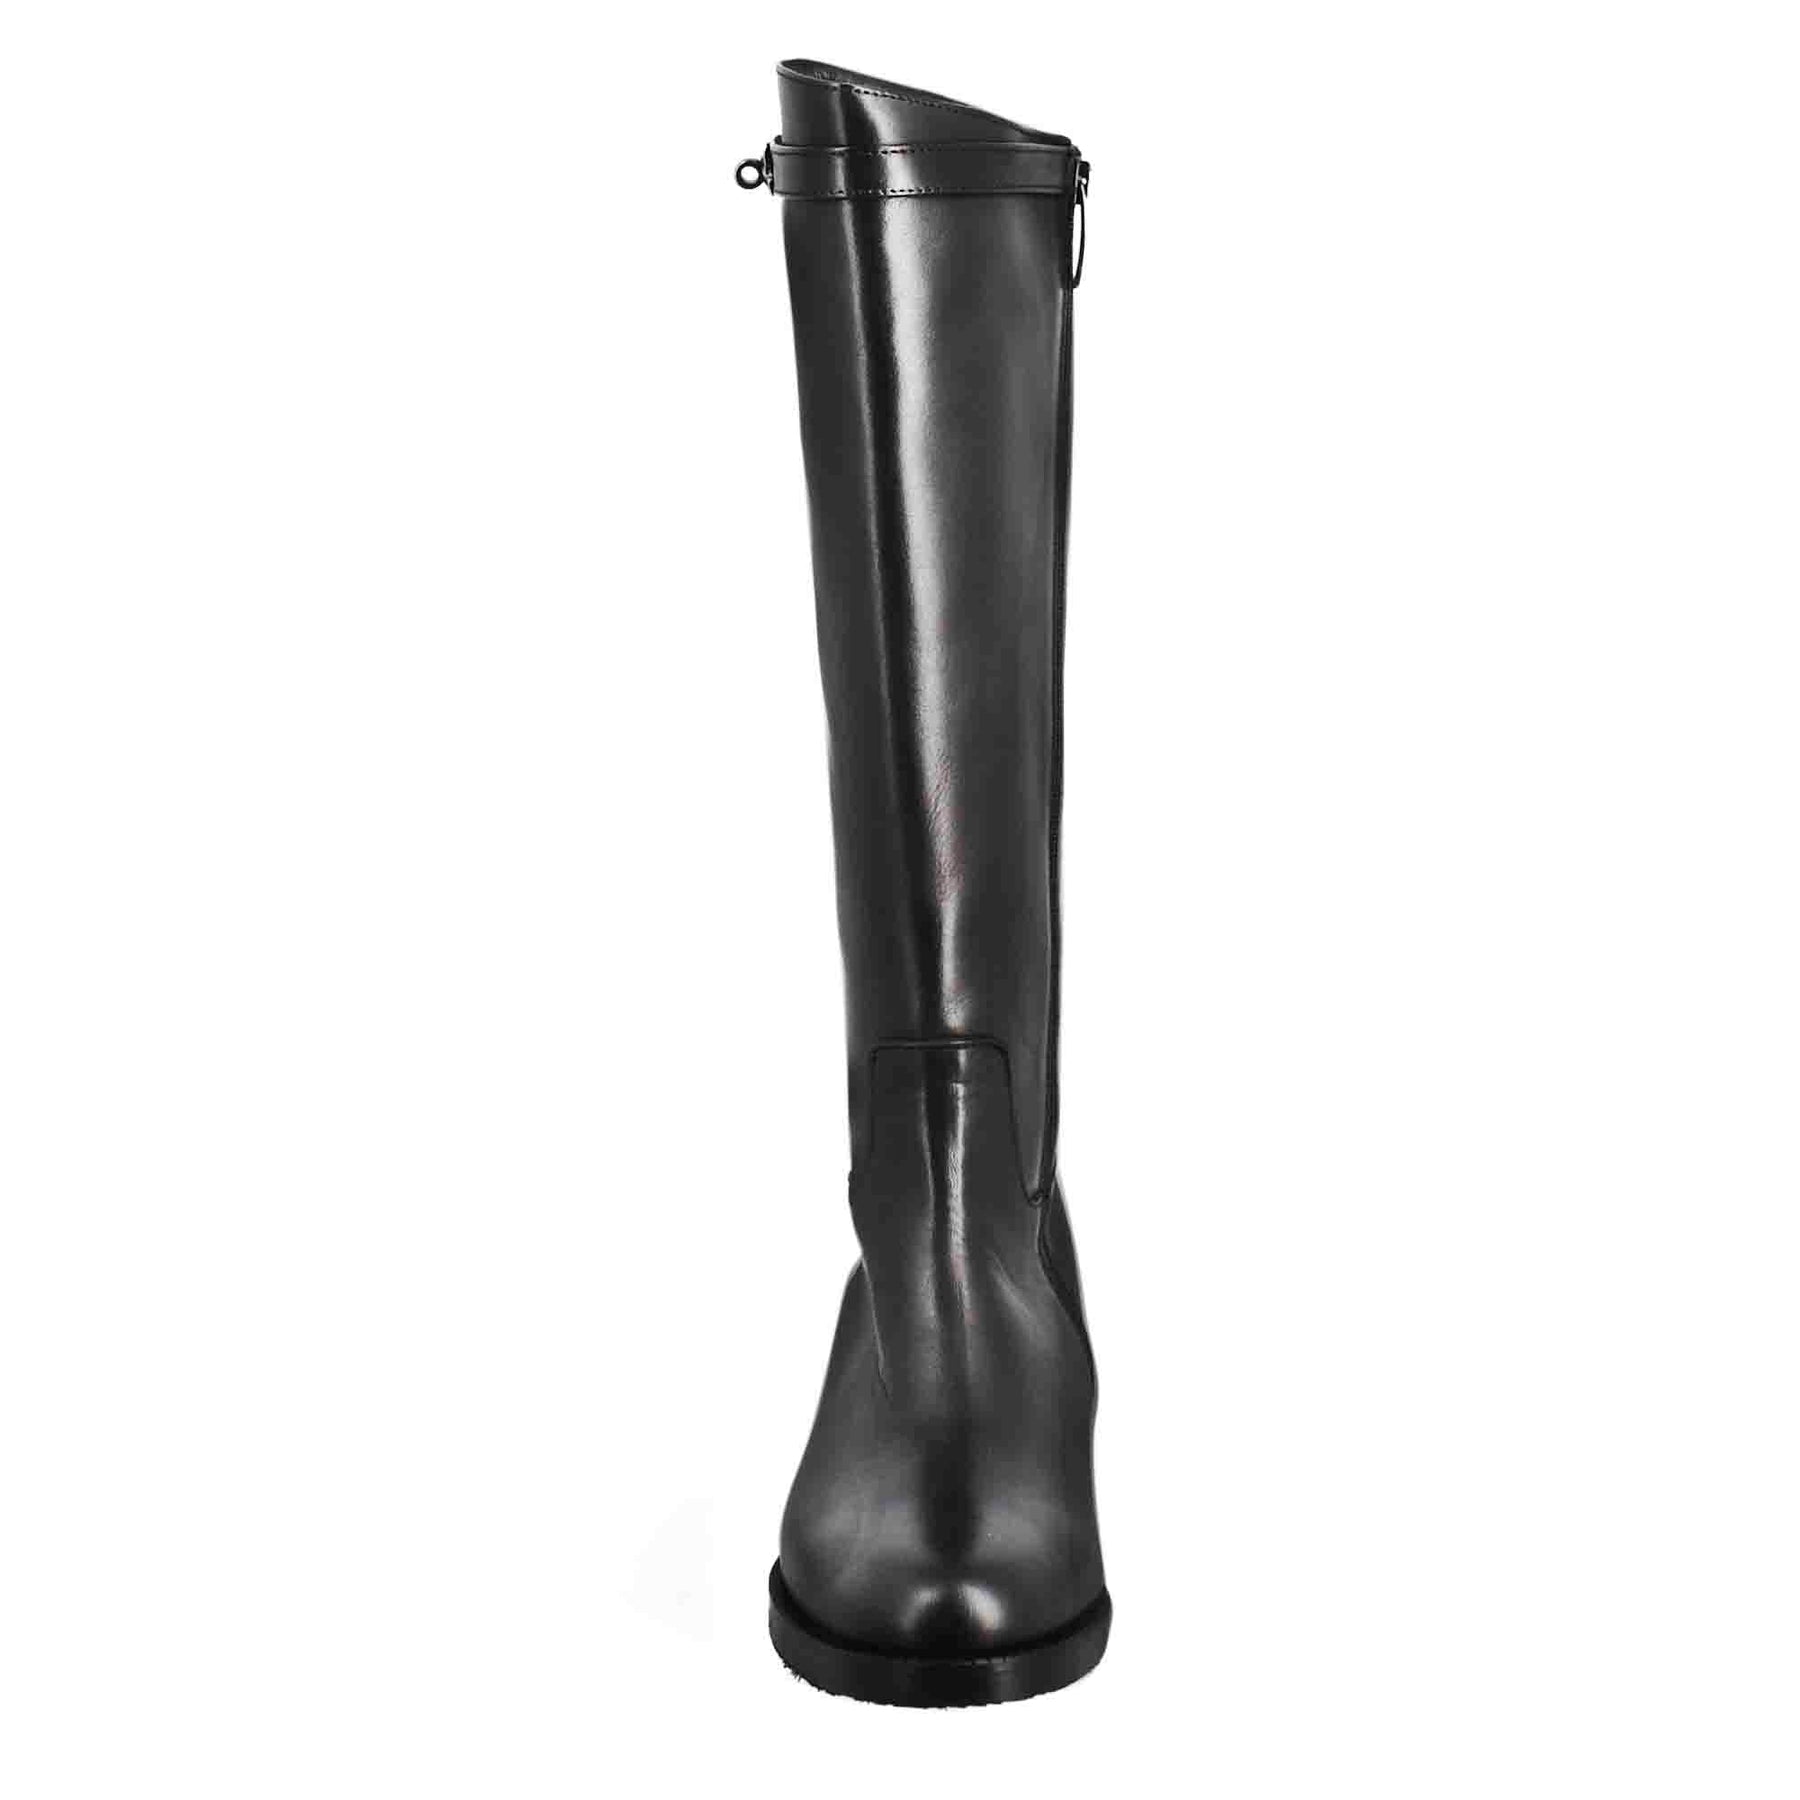 Smooth women's knee-high boot with low heel in black leather